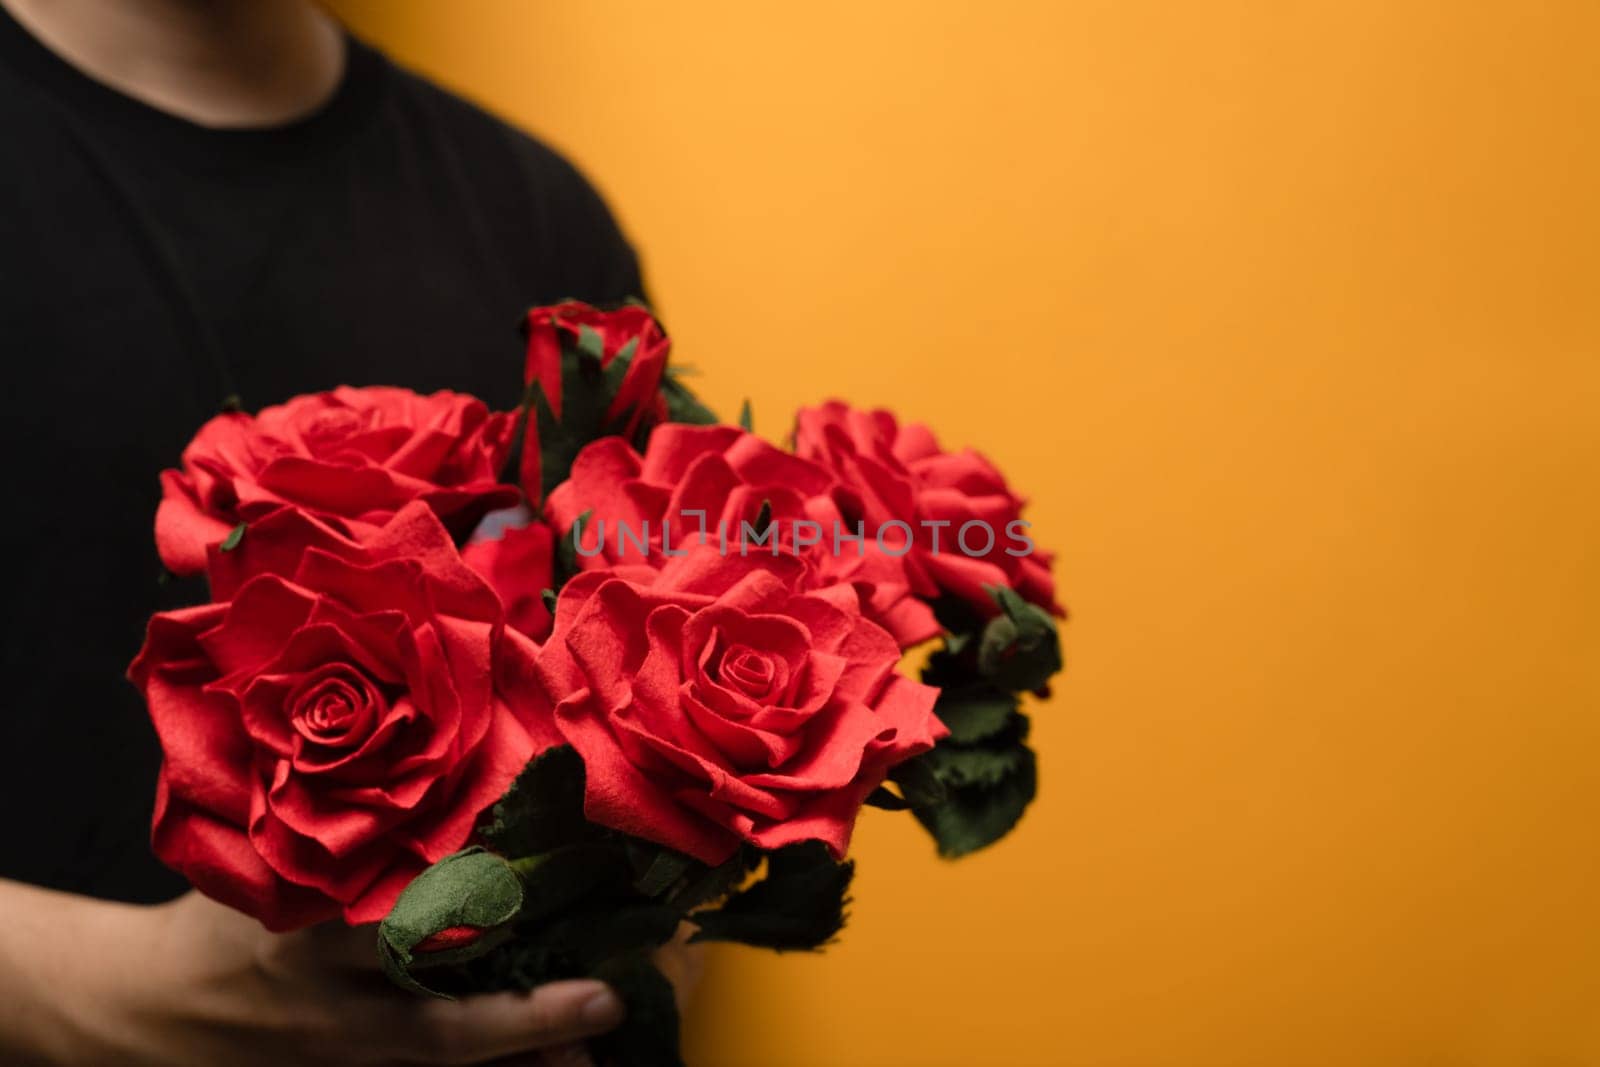 Man hands holding bouquet of red roses over yellow background with space for text by prathanchorruangsak